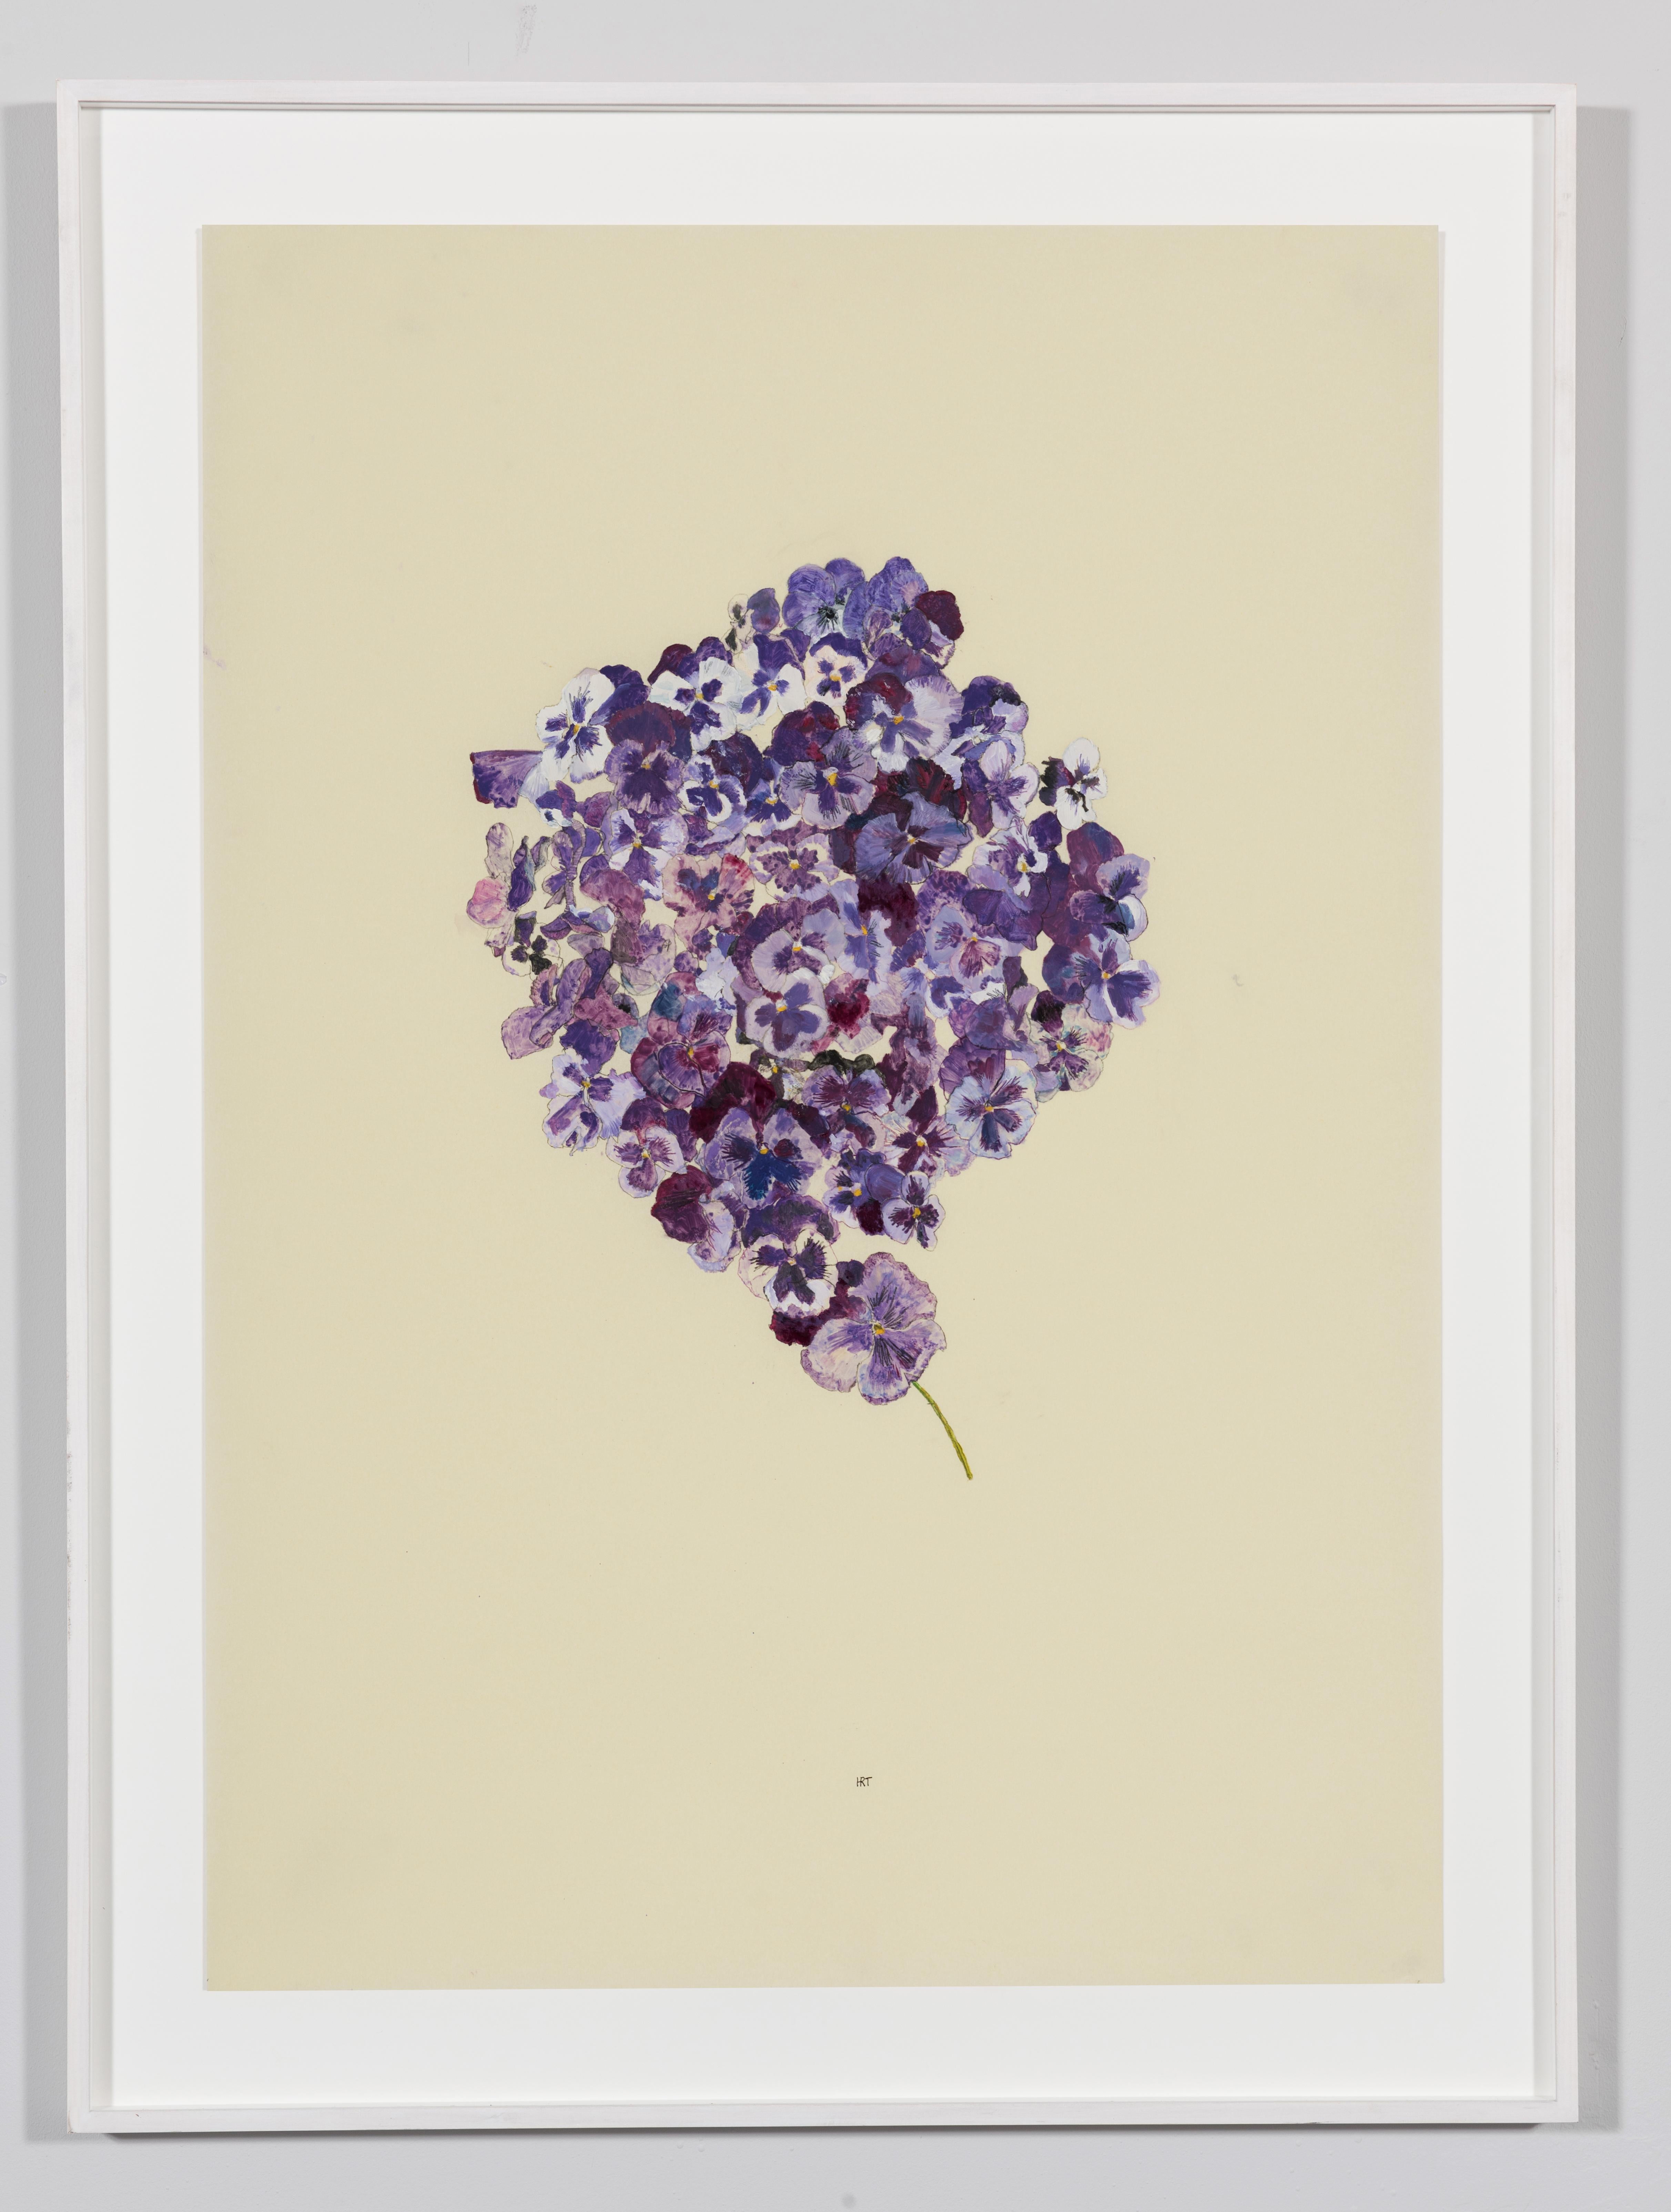 Purple Pansy Square, Mixed media on Pergamenata parchment - Art by Howard Tangye